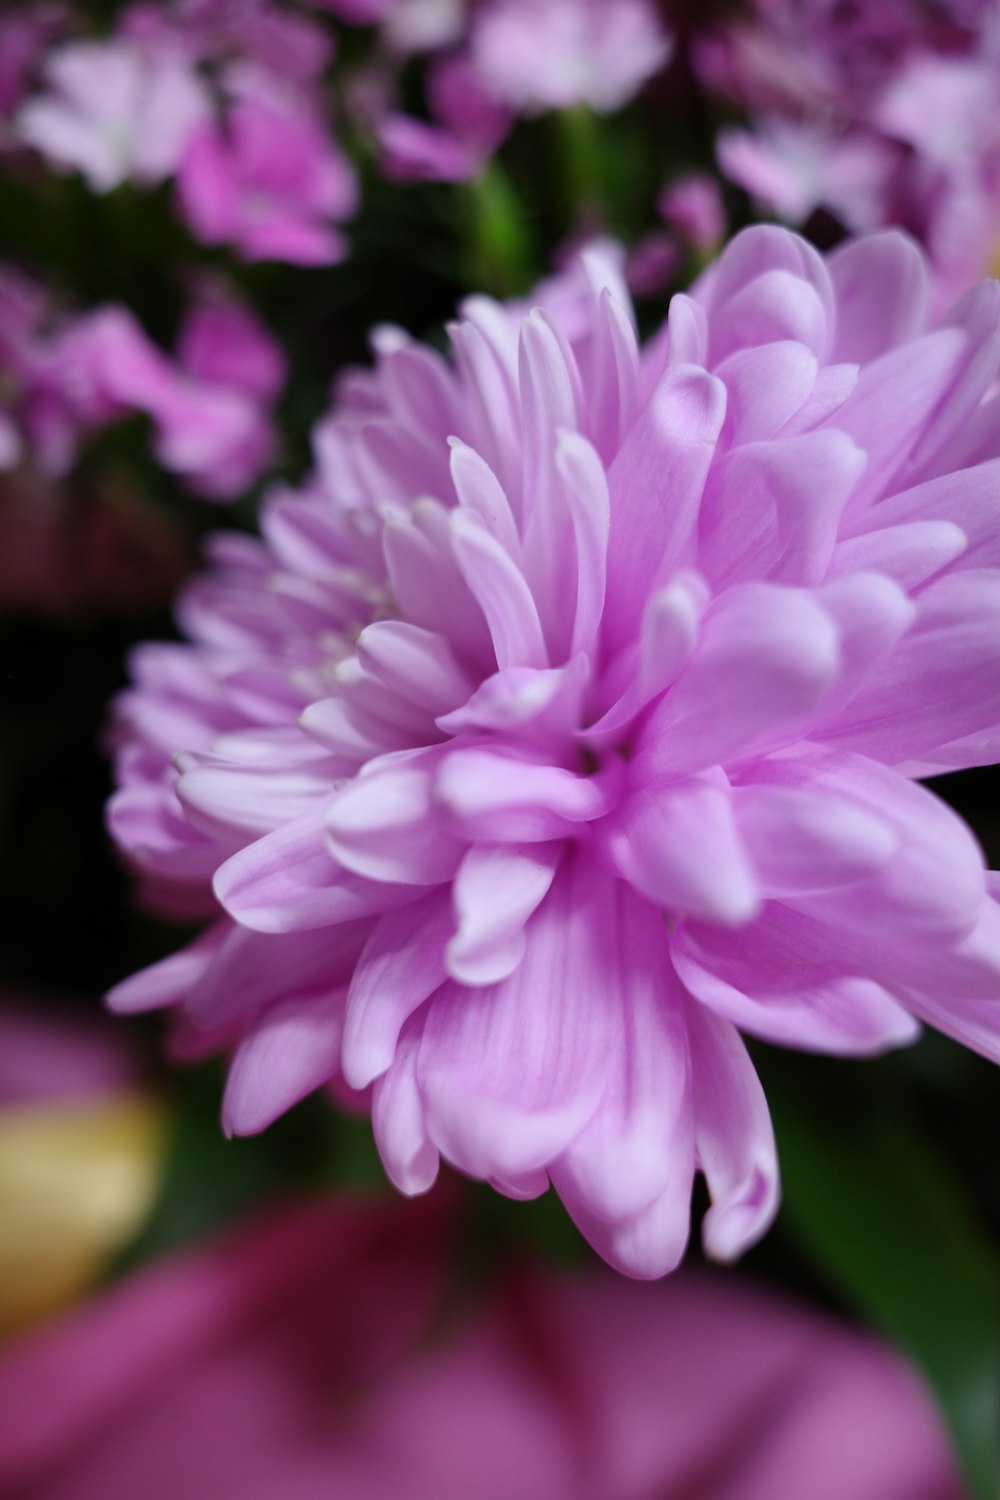 a close up of a pink flower in a vase